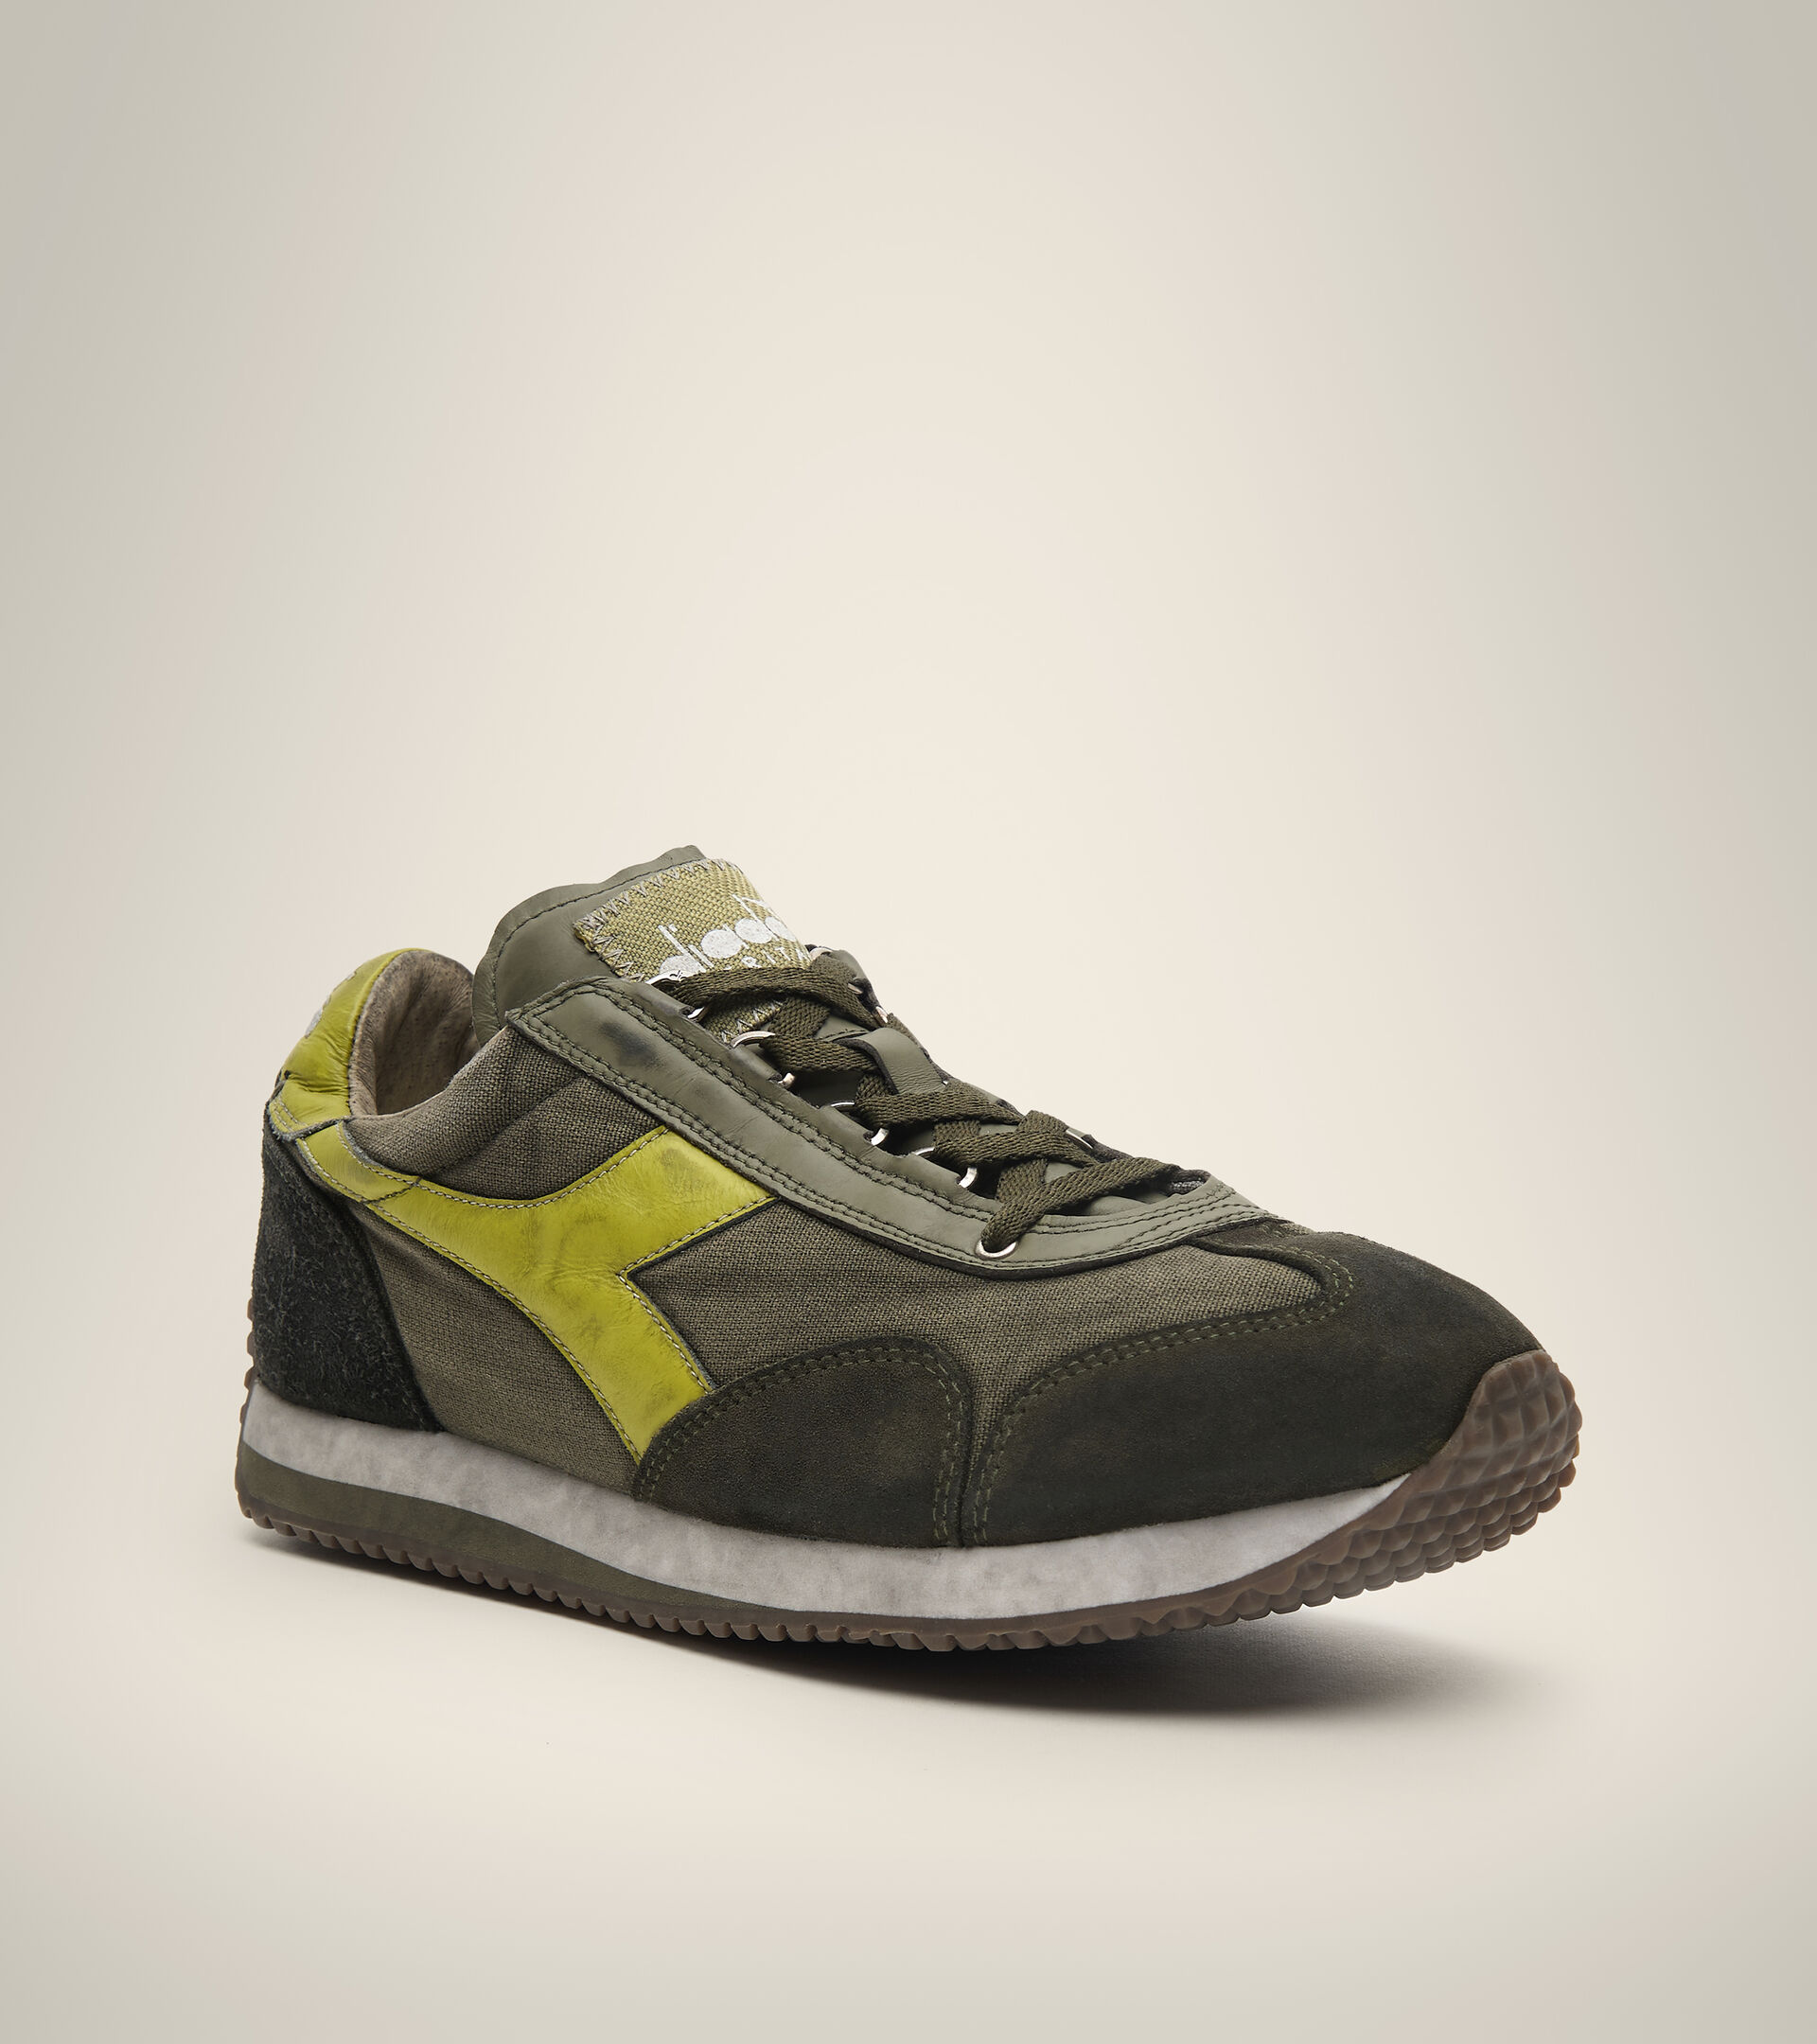 Chaussures Heritage - Unisexe EQUIPE H DIRTY STONE WASH EVO VERT OLIVE BRULE/OLIVE NUIT - Diadora